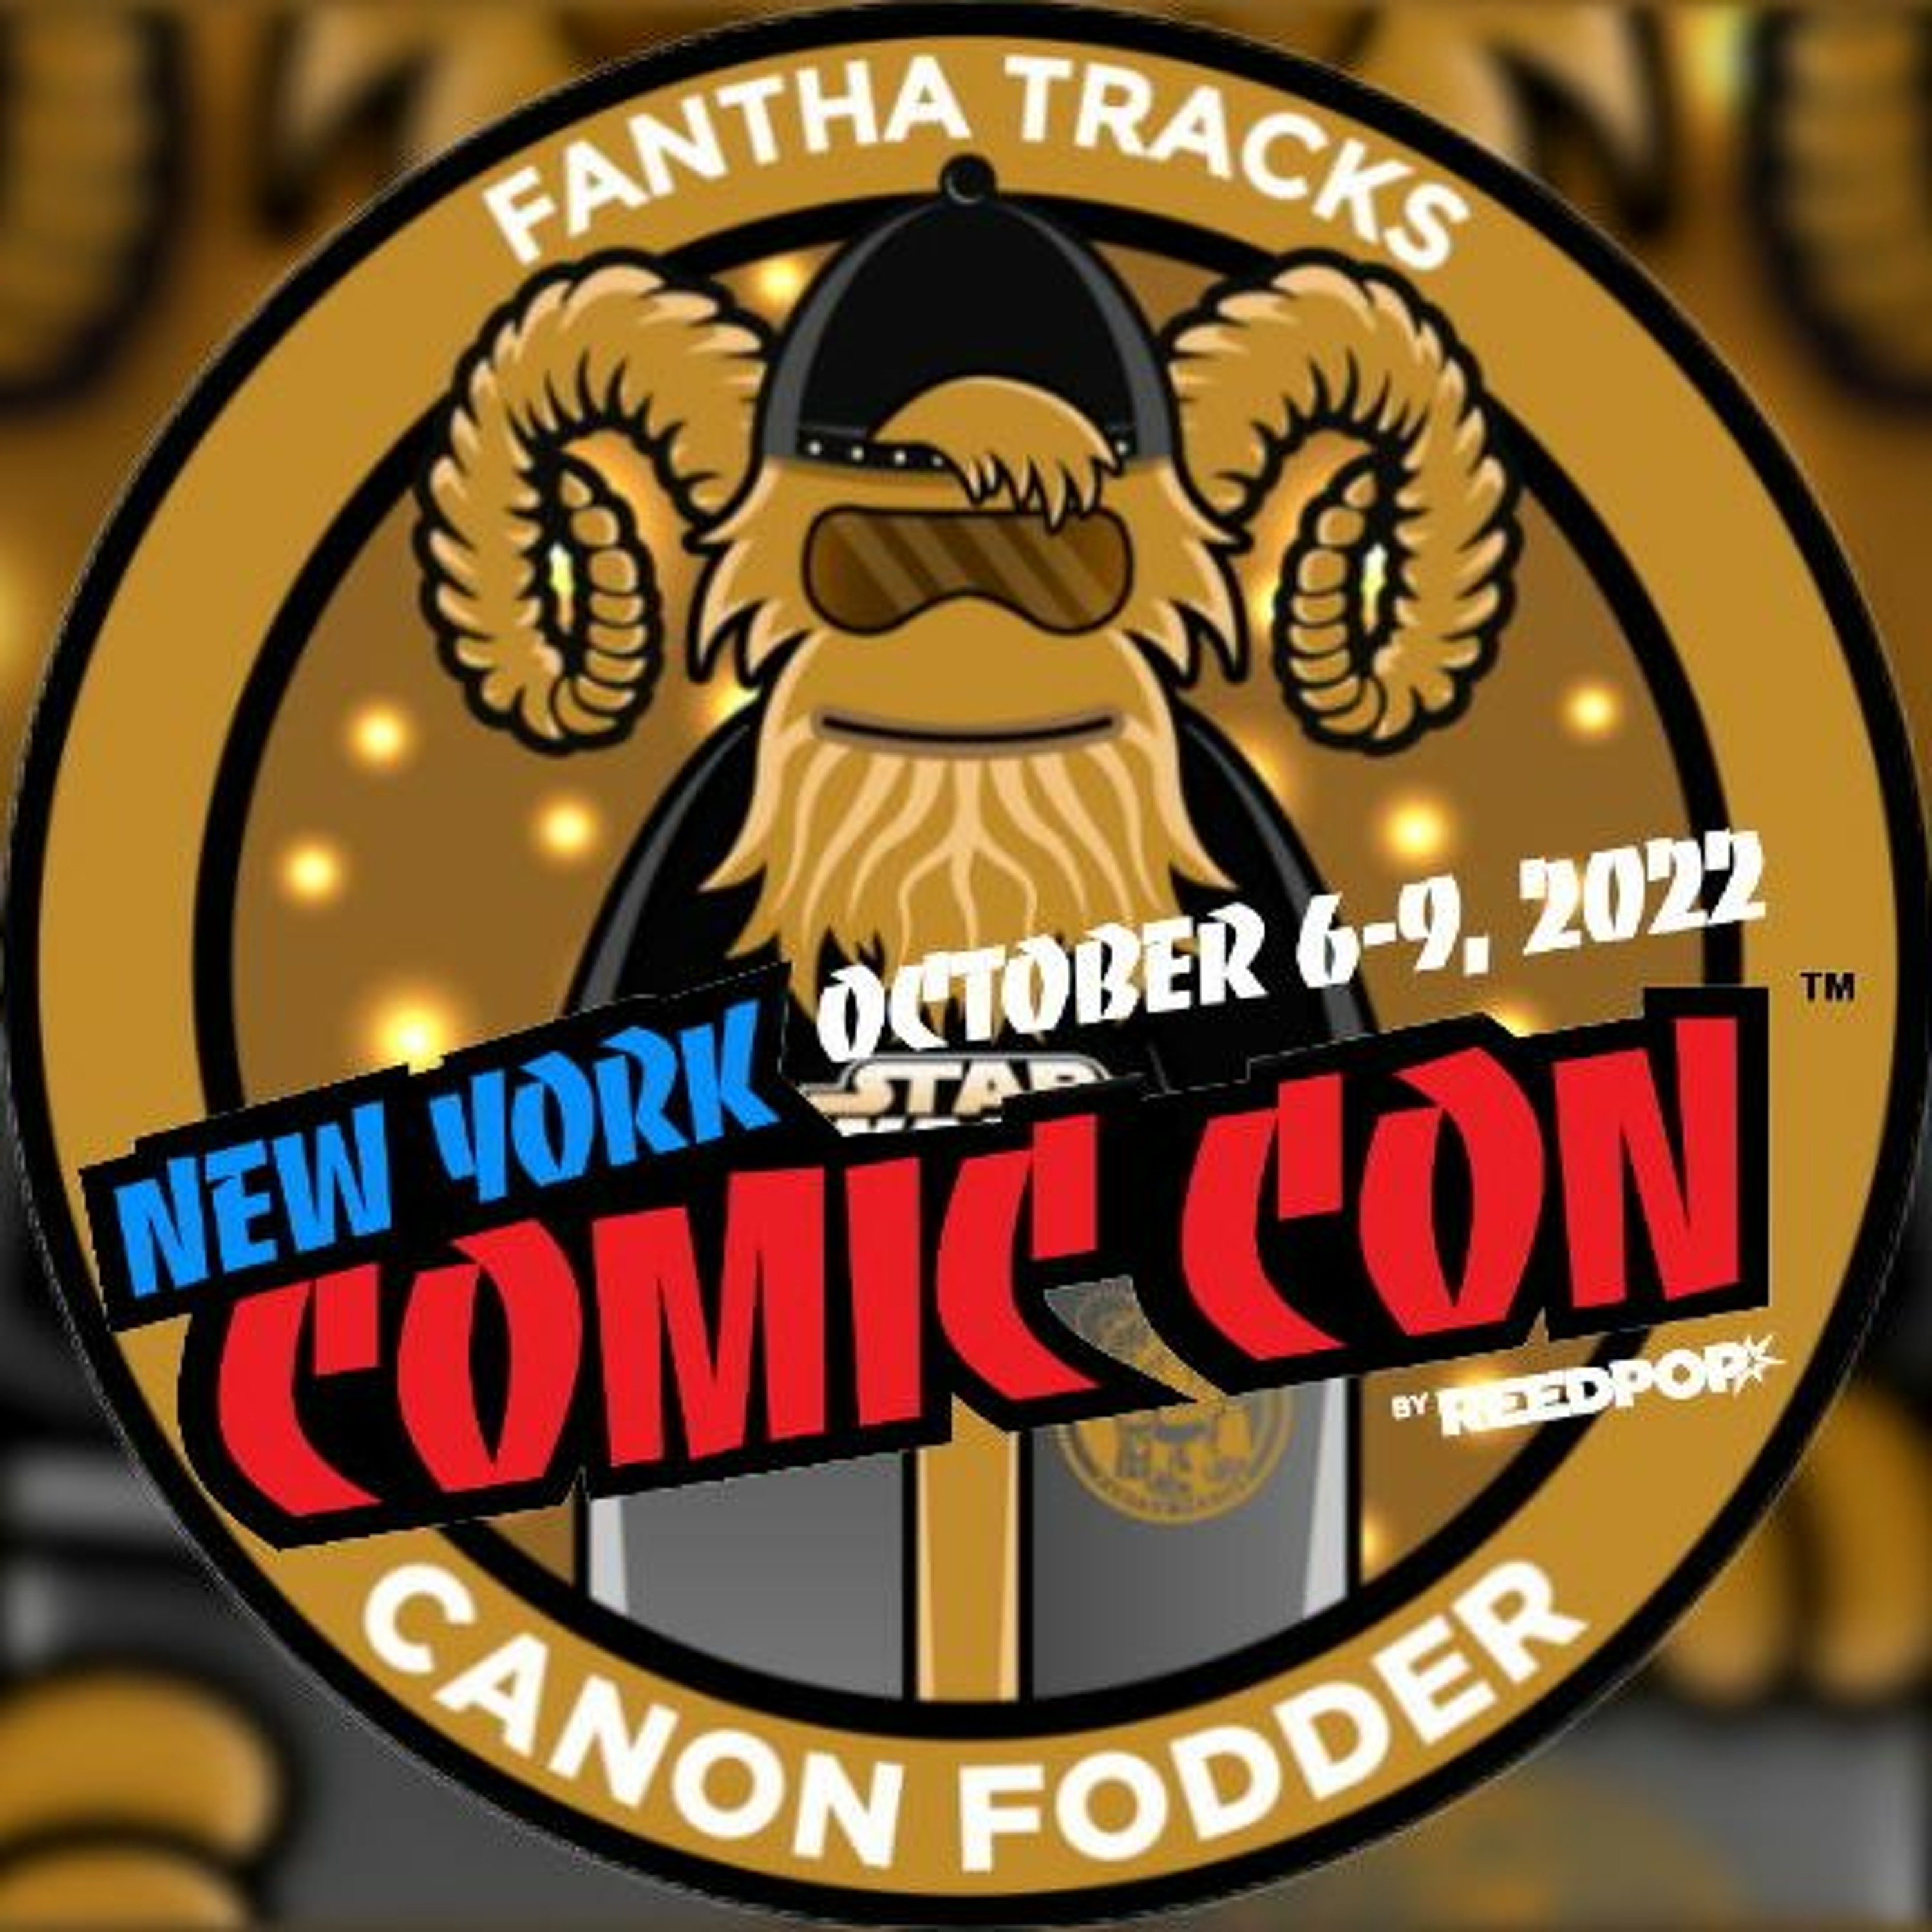 Canon Fodder at New York Comic Con 2022: Star Wars The High Republic Returns Panel